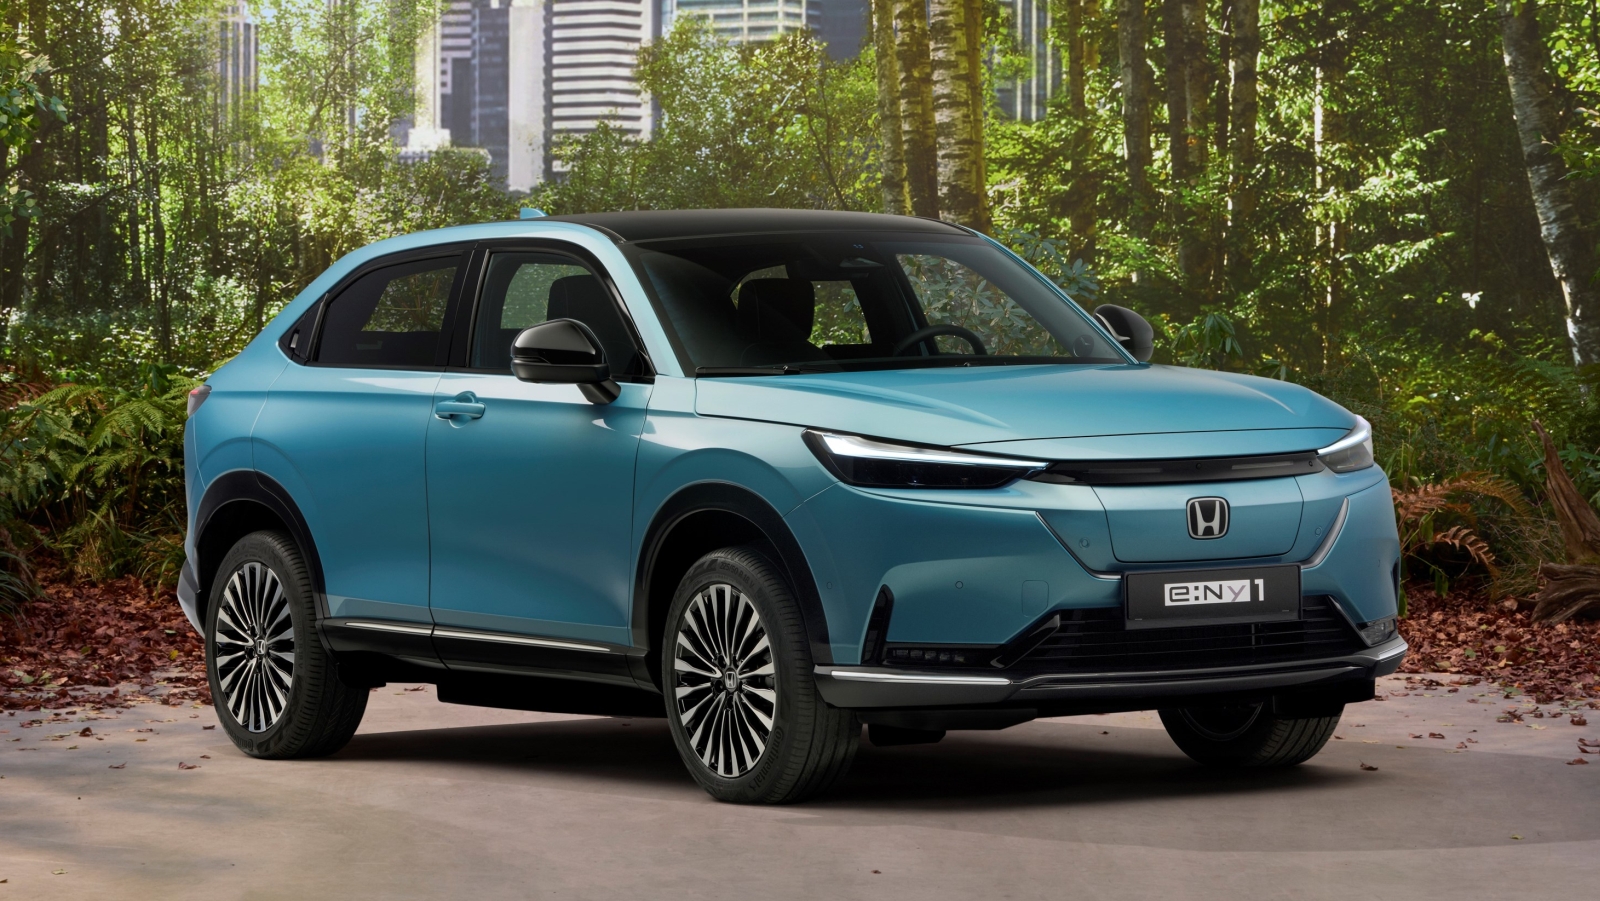 436177_e_Ny1_The_next_all-electric_vehicle_from_Honda_combines_comfort_performance